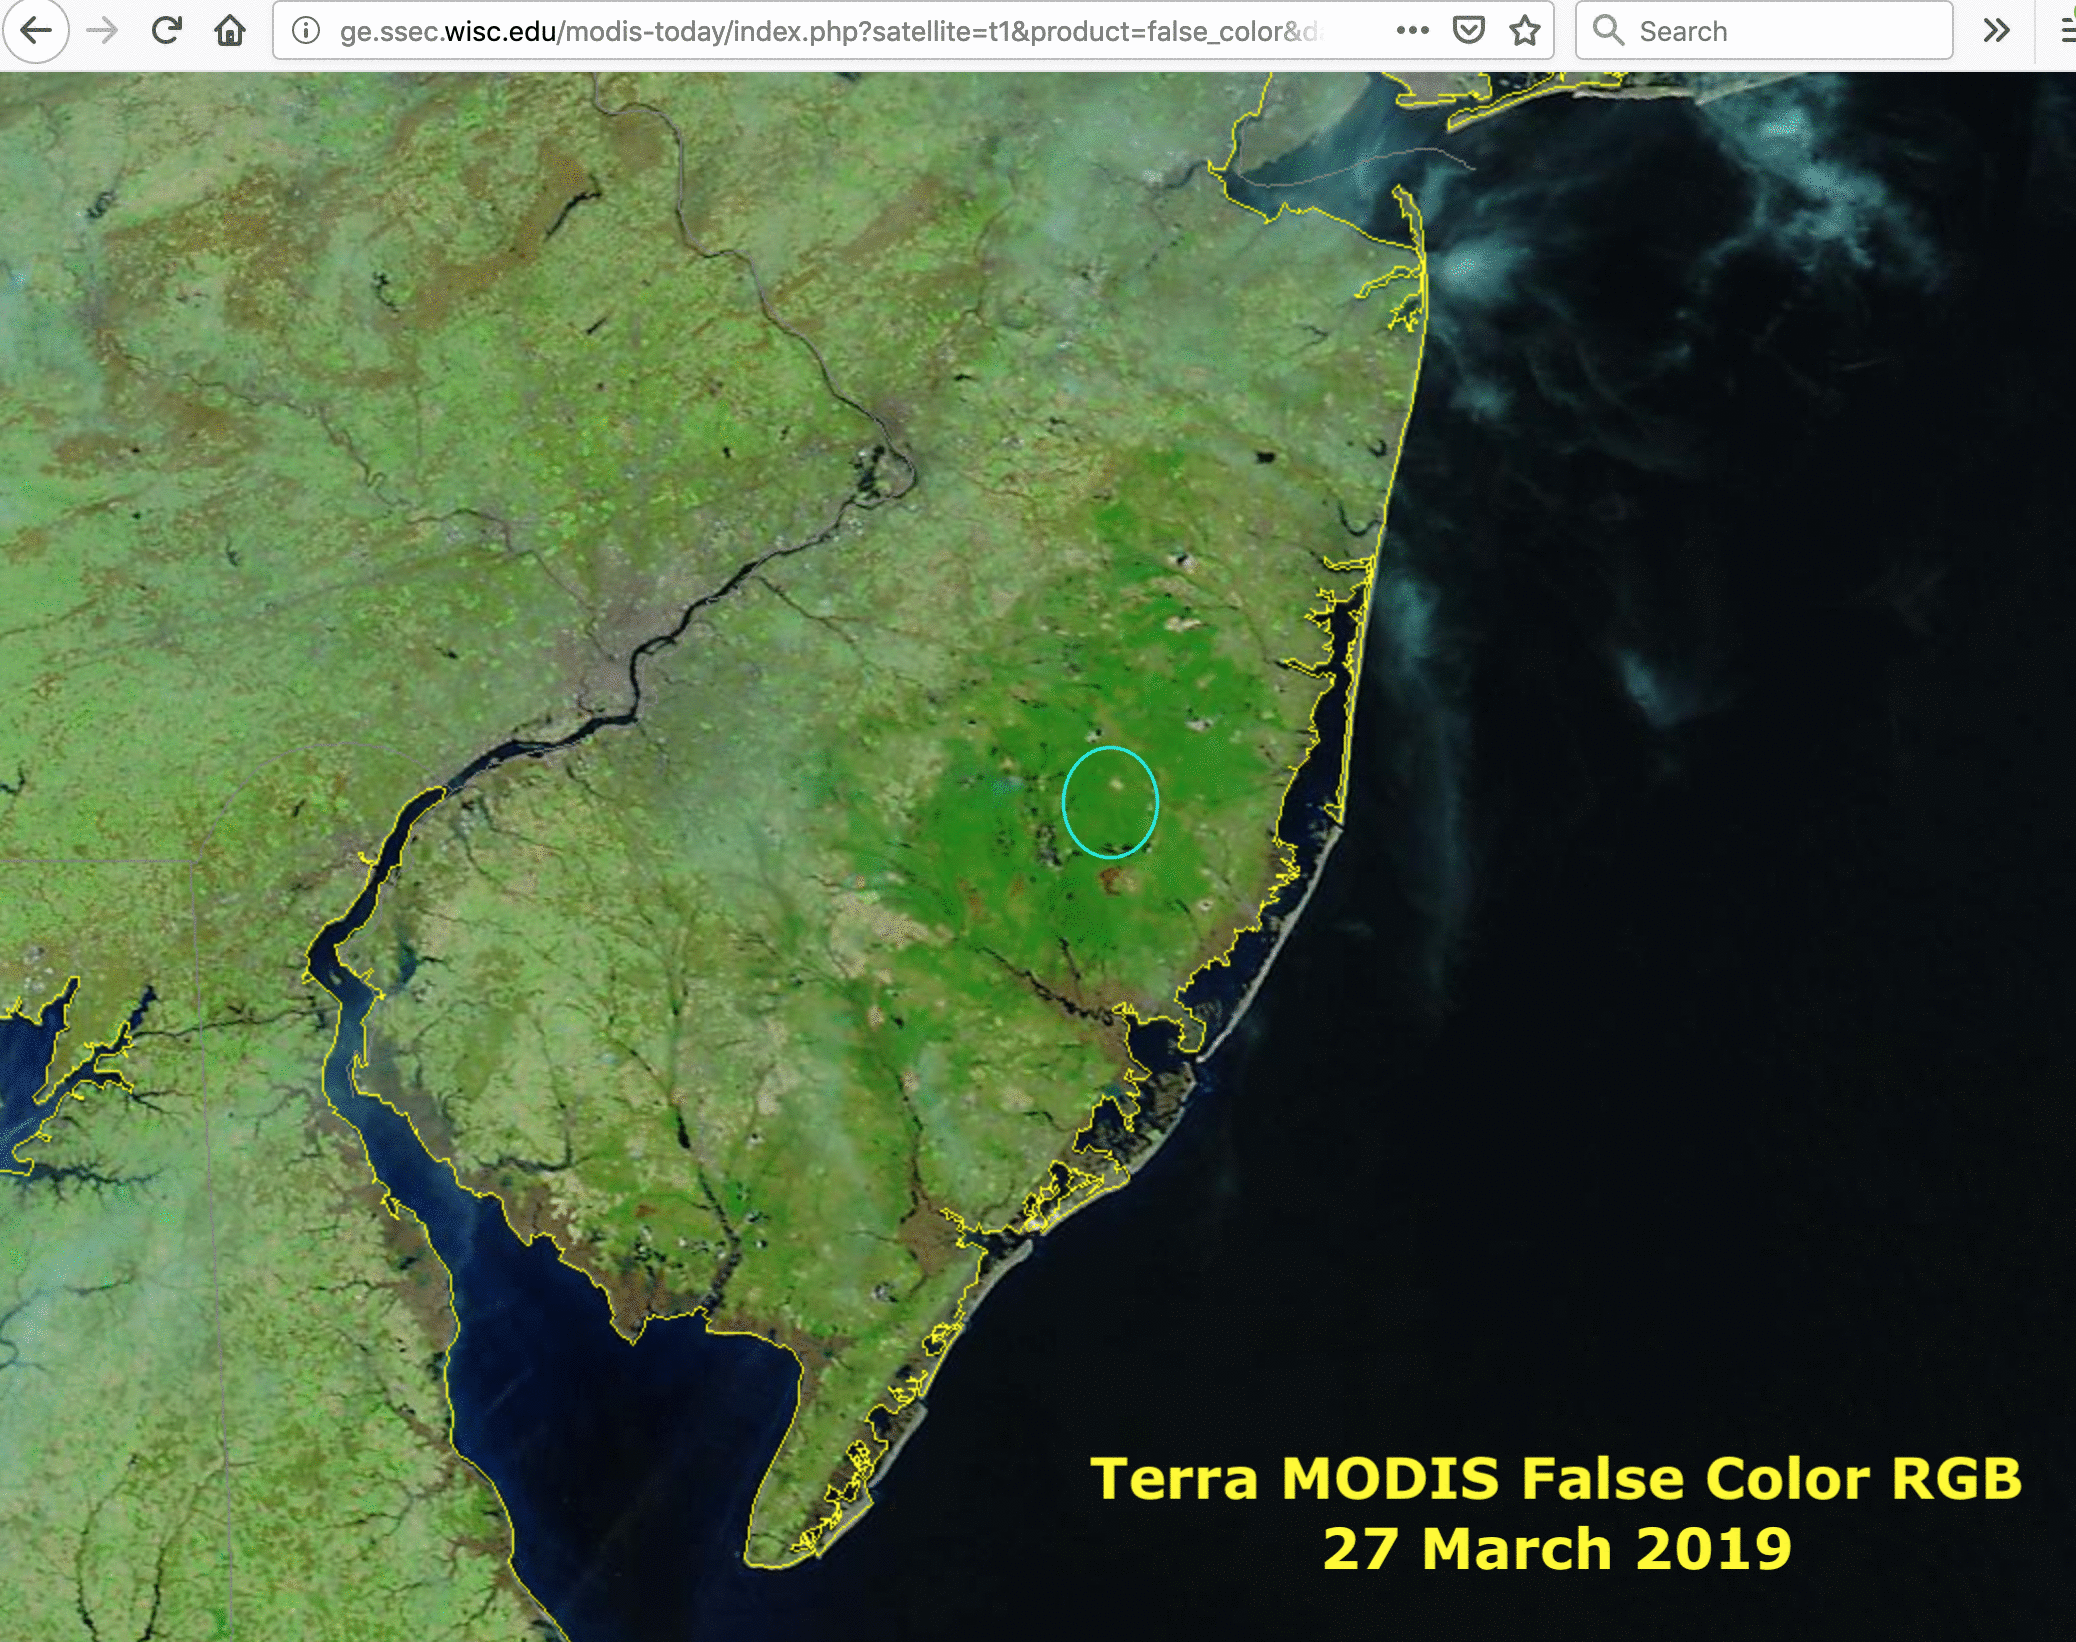 Terra MODIS False Color RGB images on 28 March and 01 April [click to enlarge]